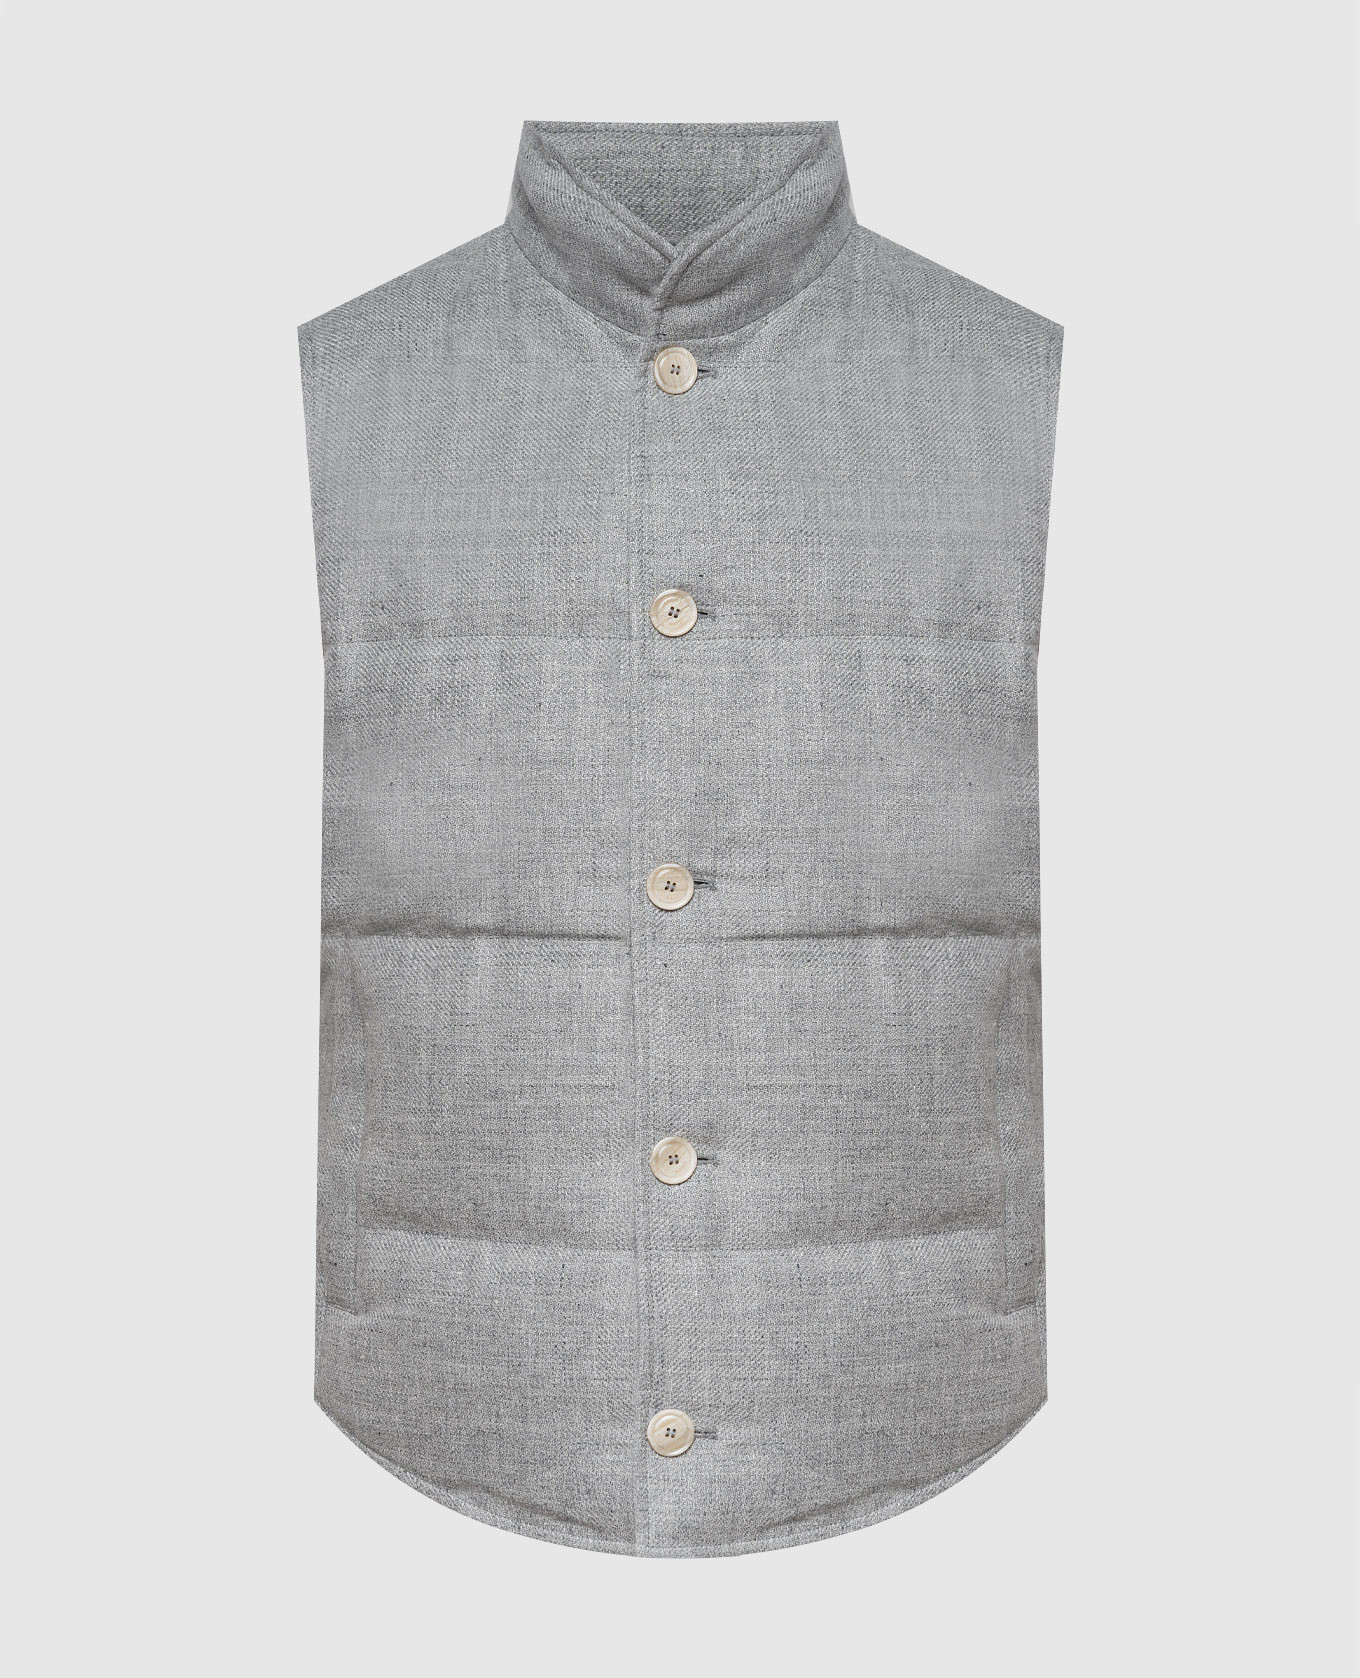 Gray down vest made of linen, wool and silk